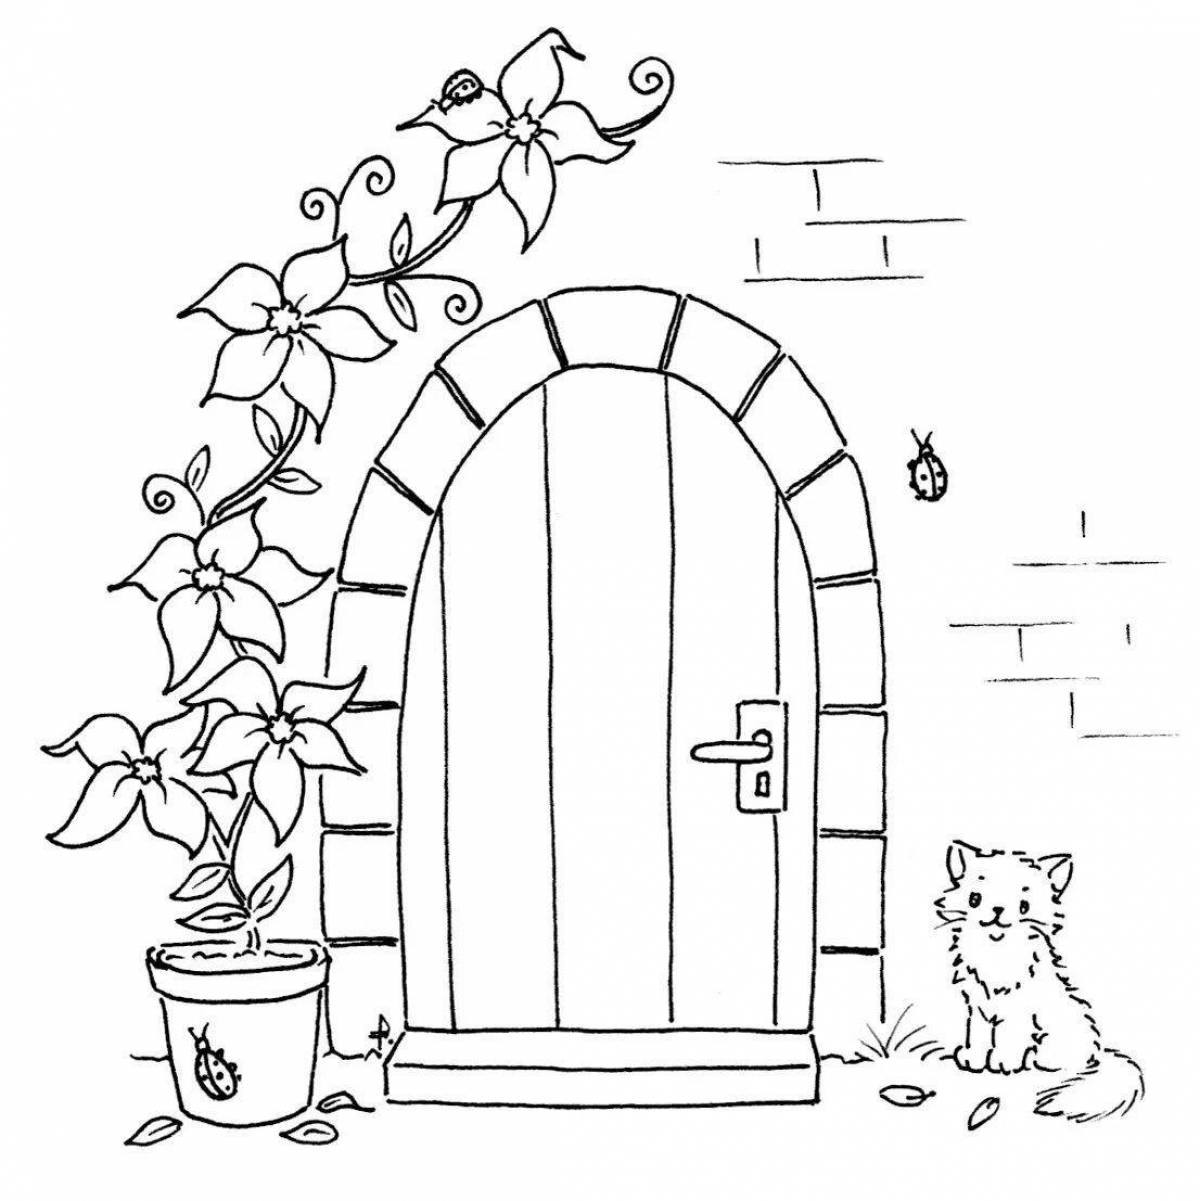 Adorable seek out doors coloring page